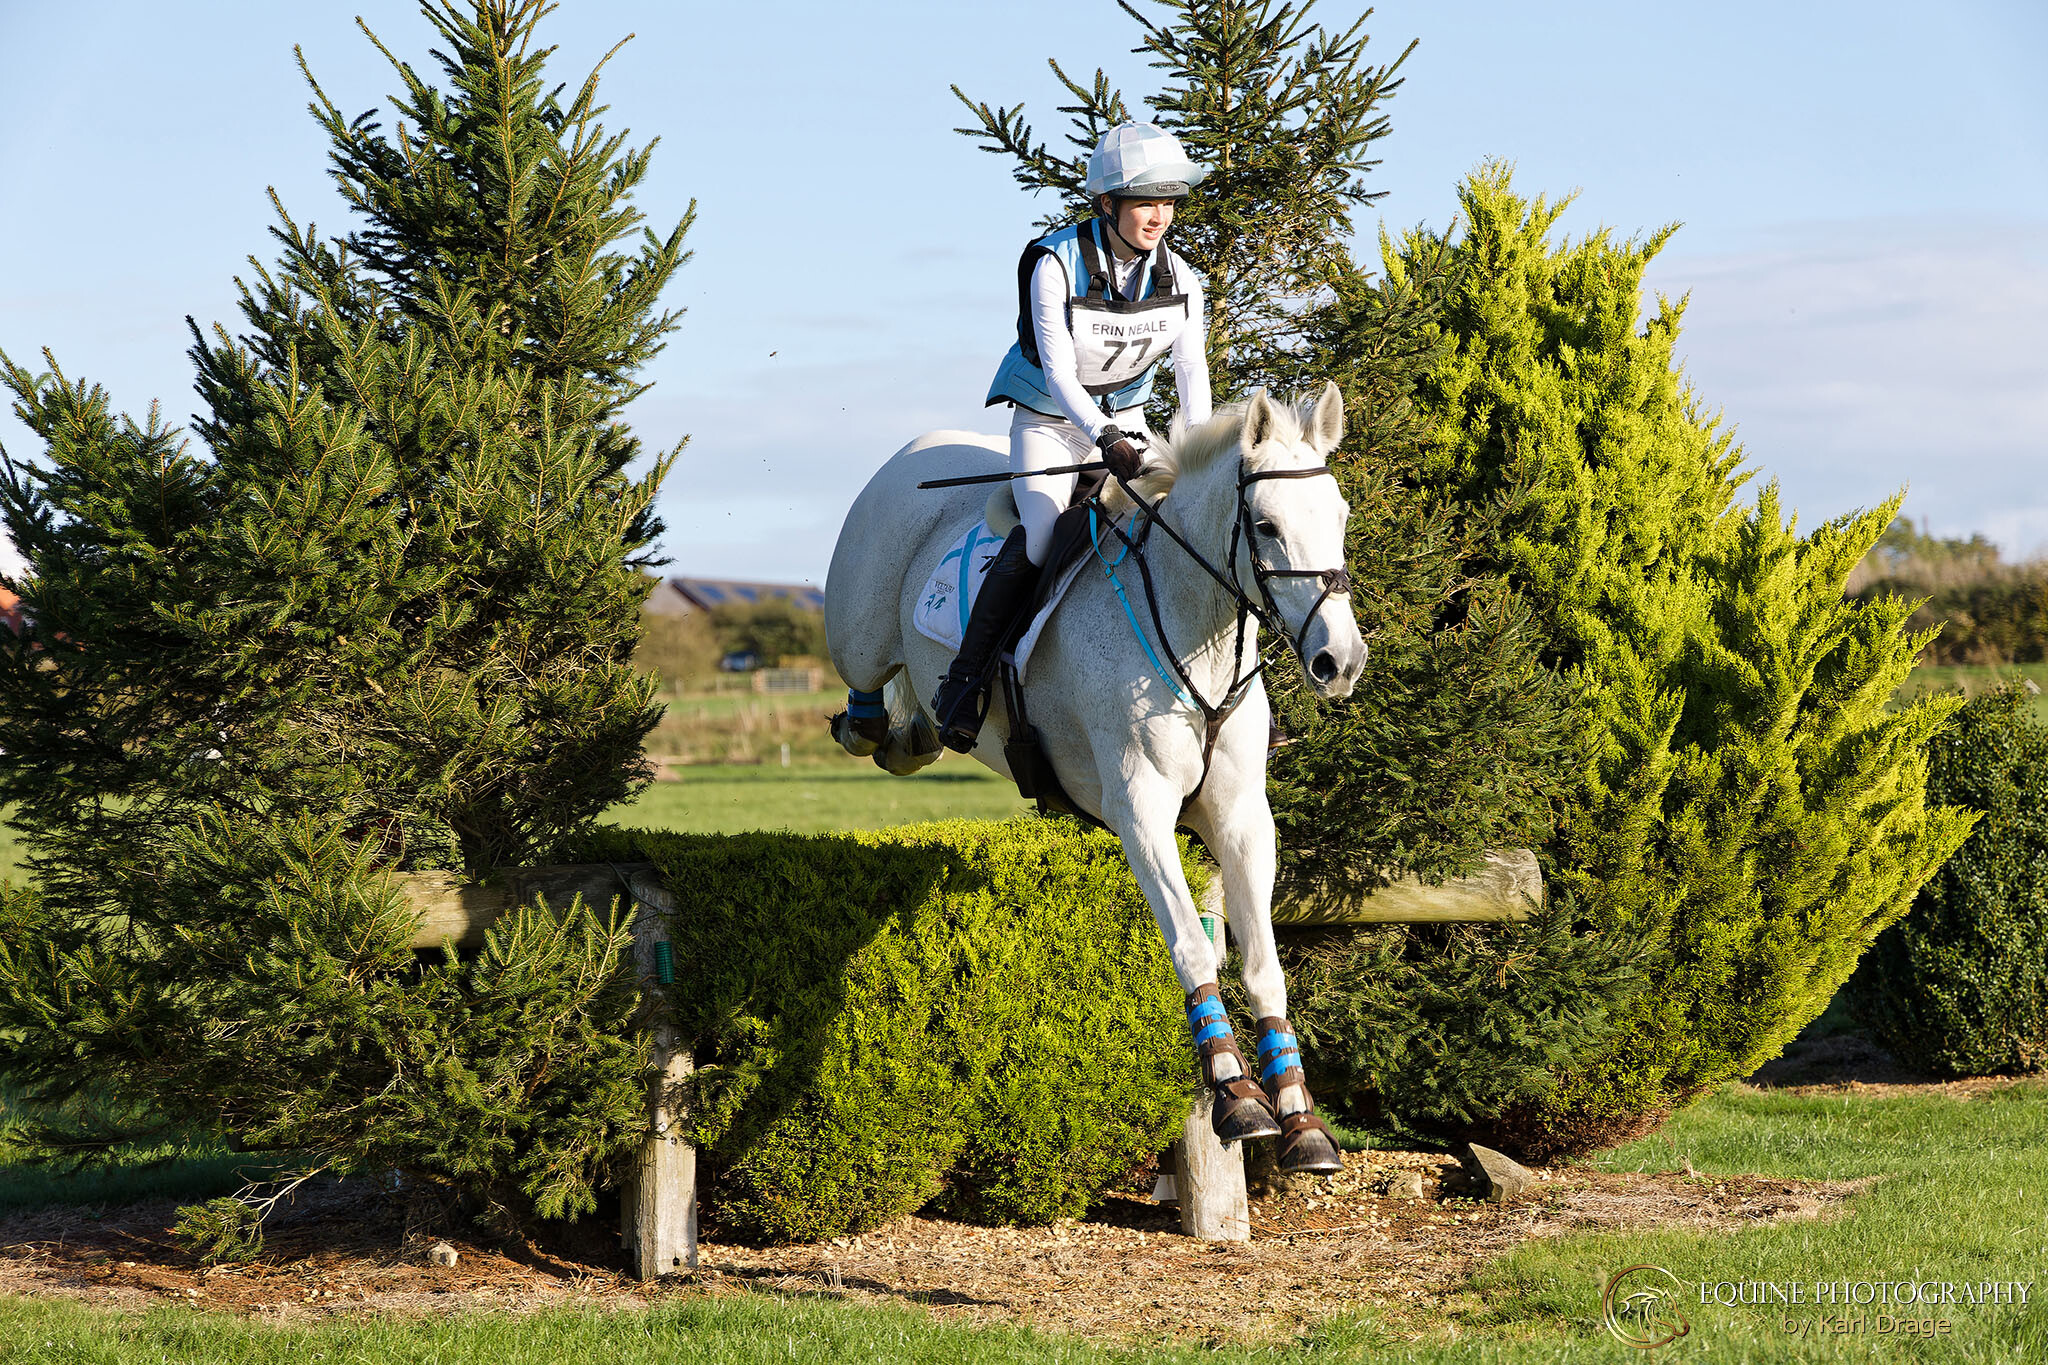 Erin Neale and her horse fly the hedge during the Intermediate class at the H&P Equine Events Hunter Trial at Milton Keynes Equestrian Centre.